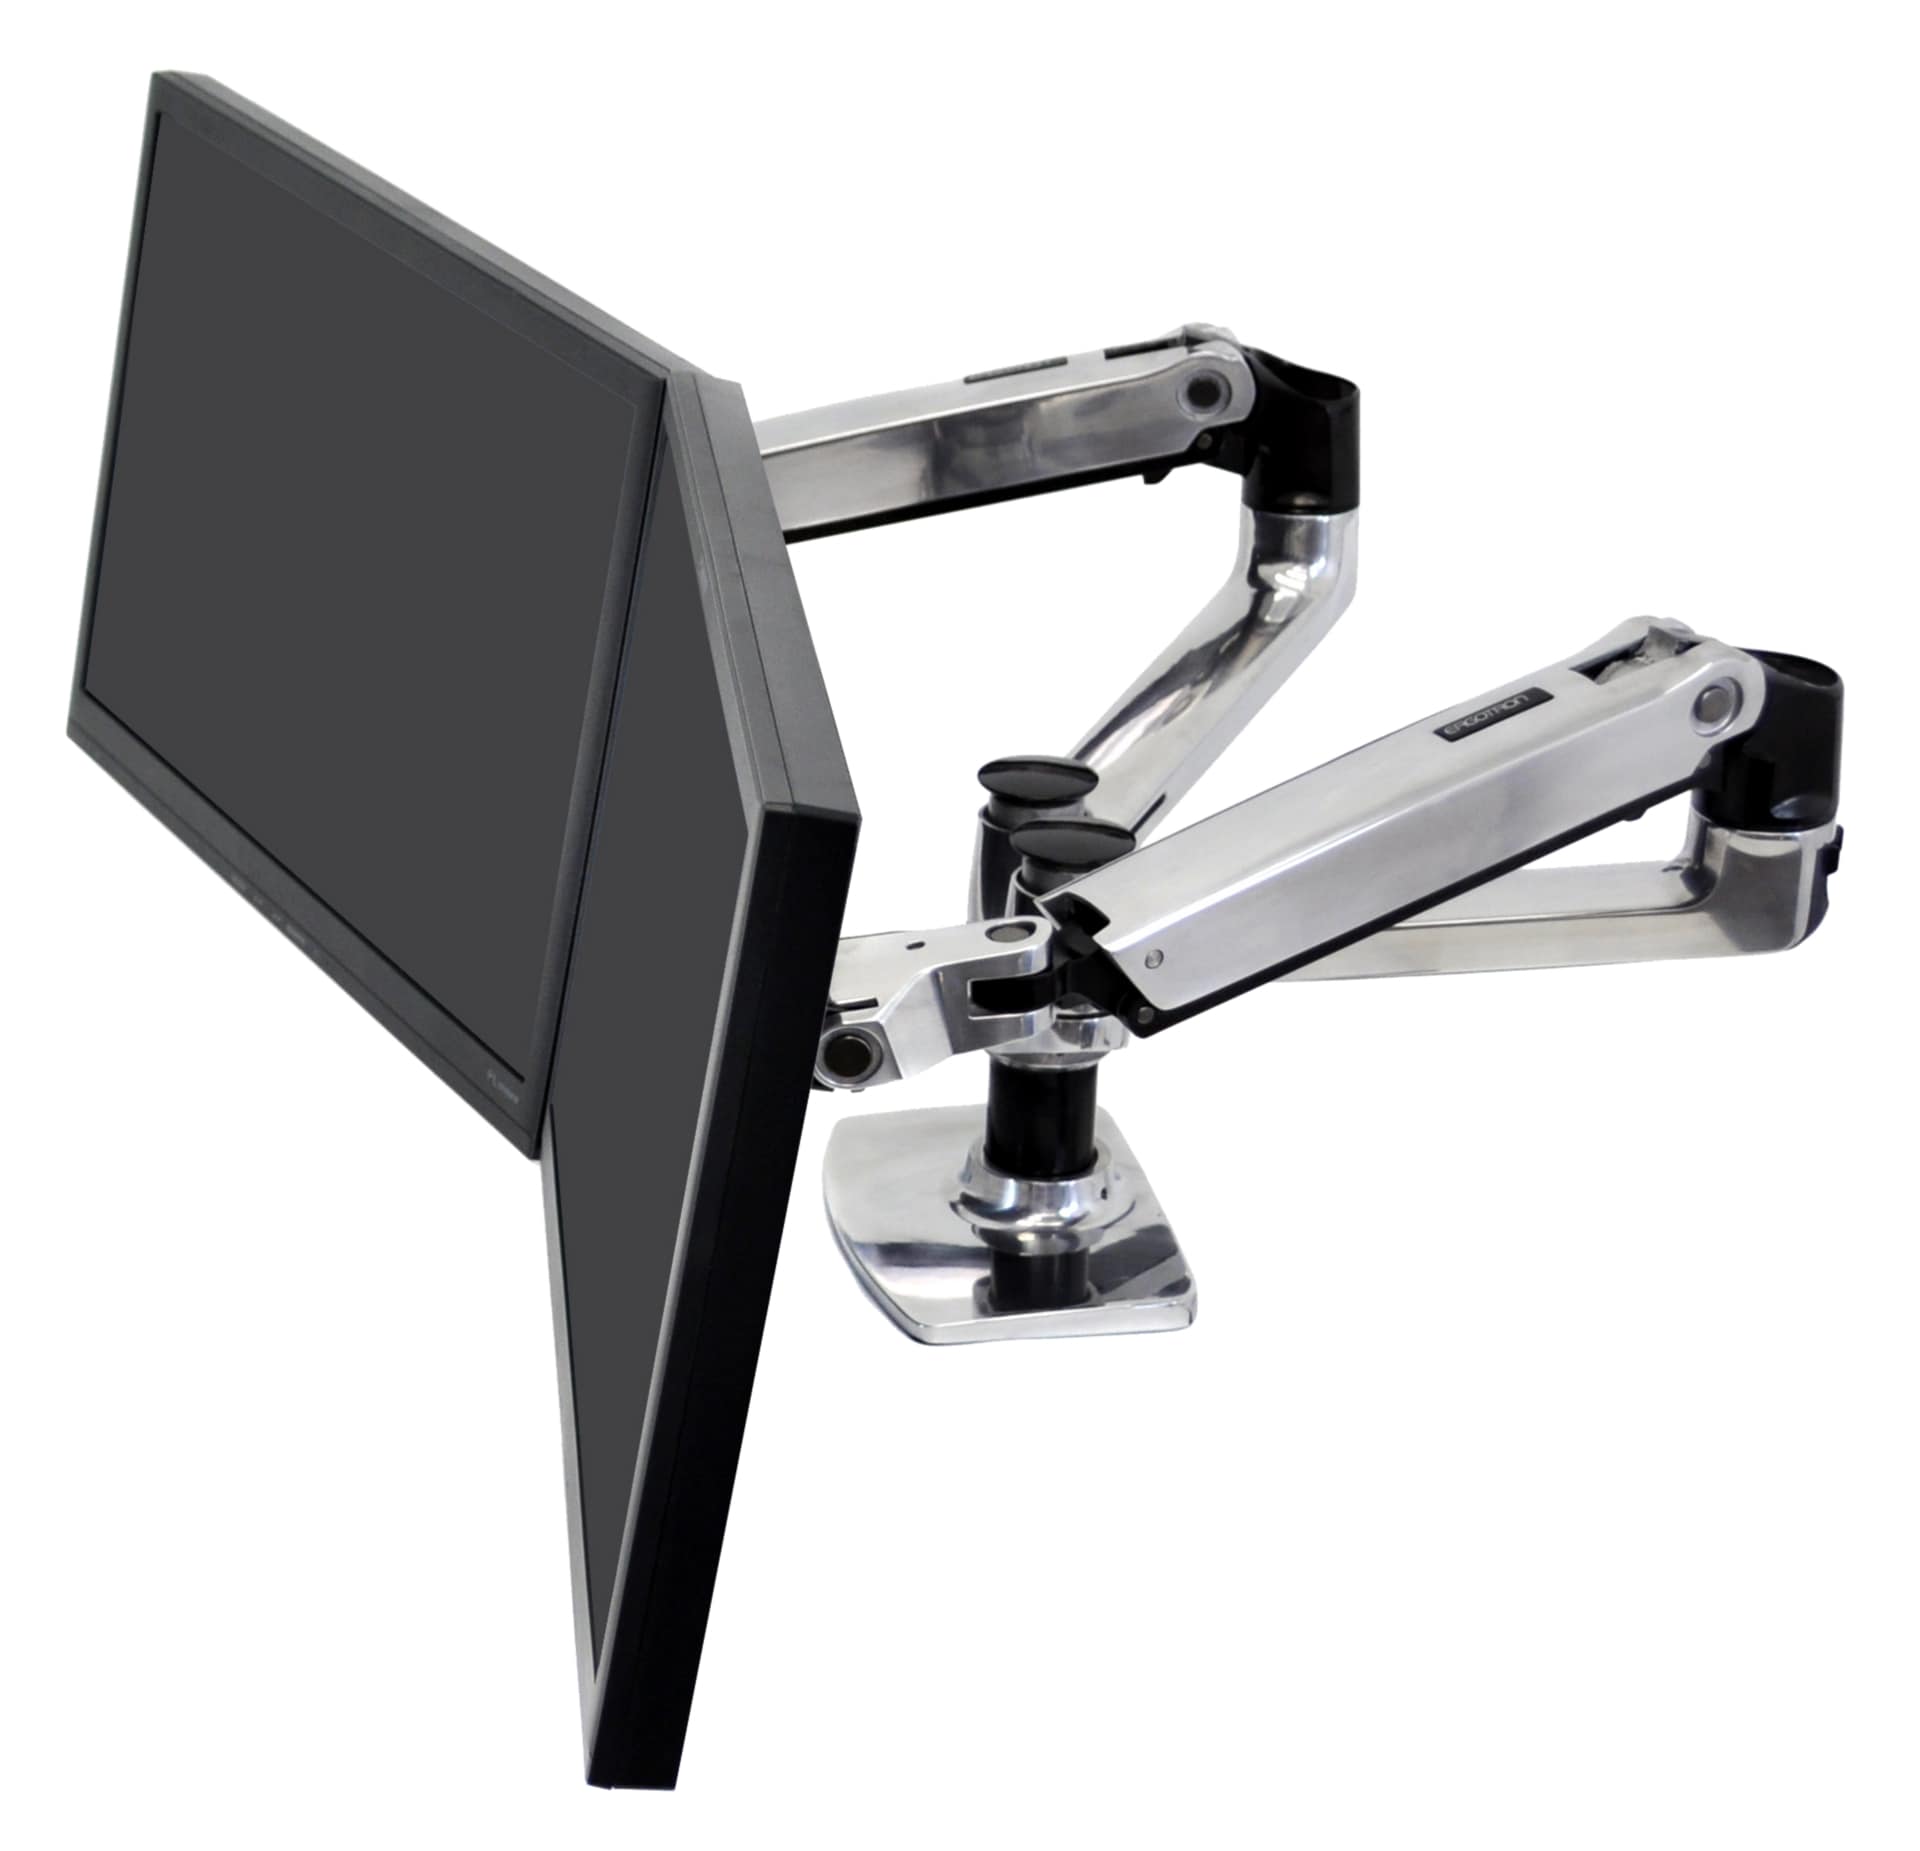 Ergotron LX Dual Side-by-Side Arm mounting kit - Patented Constant Force Te